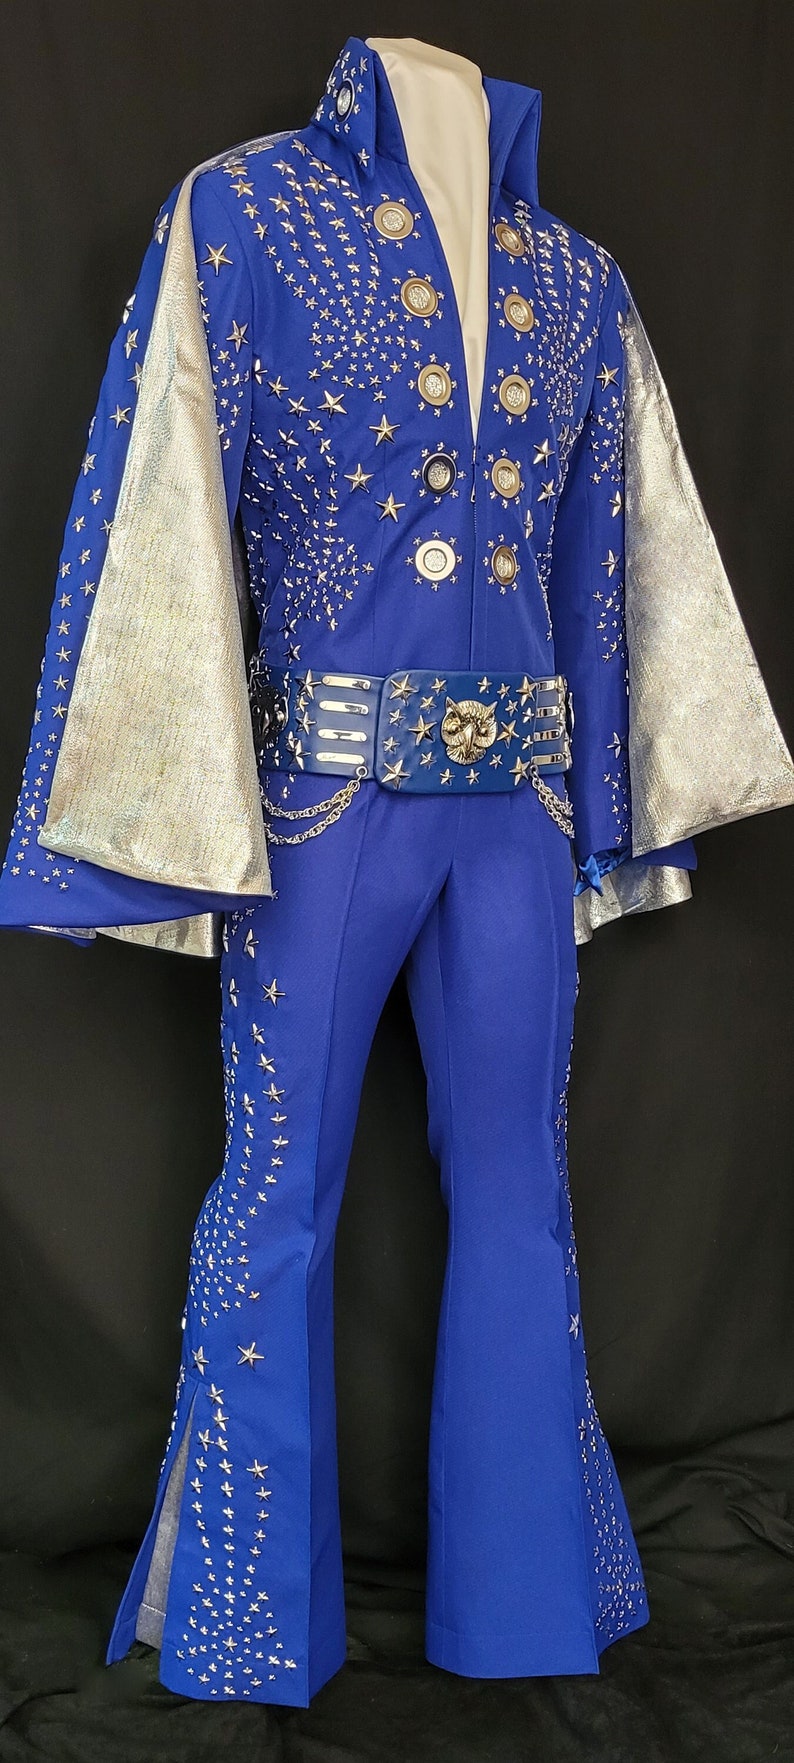 Elvis Presley Reproduction OWL Jumpsuit Belt and Cape as Worn - Etsy